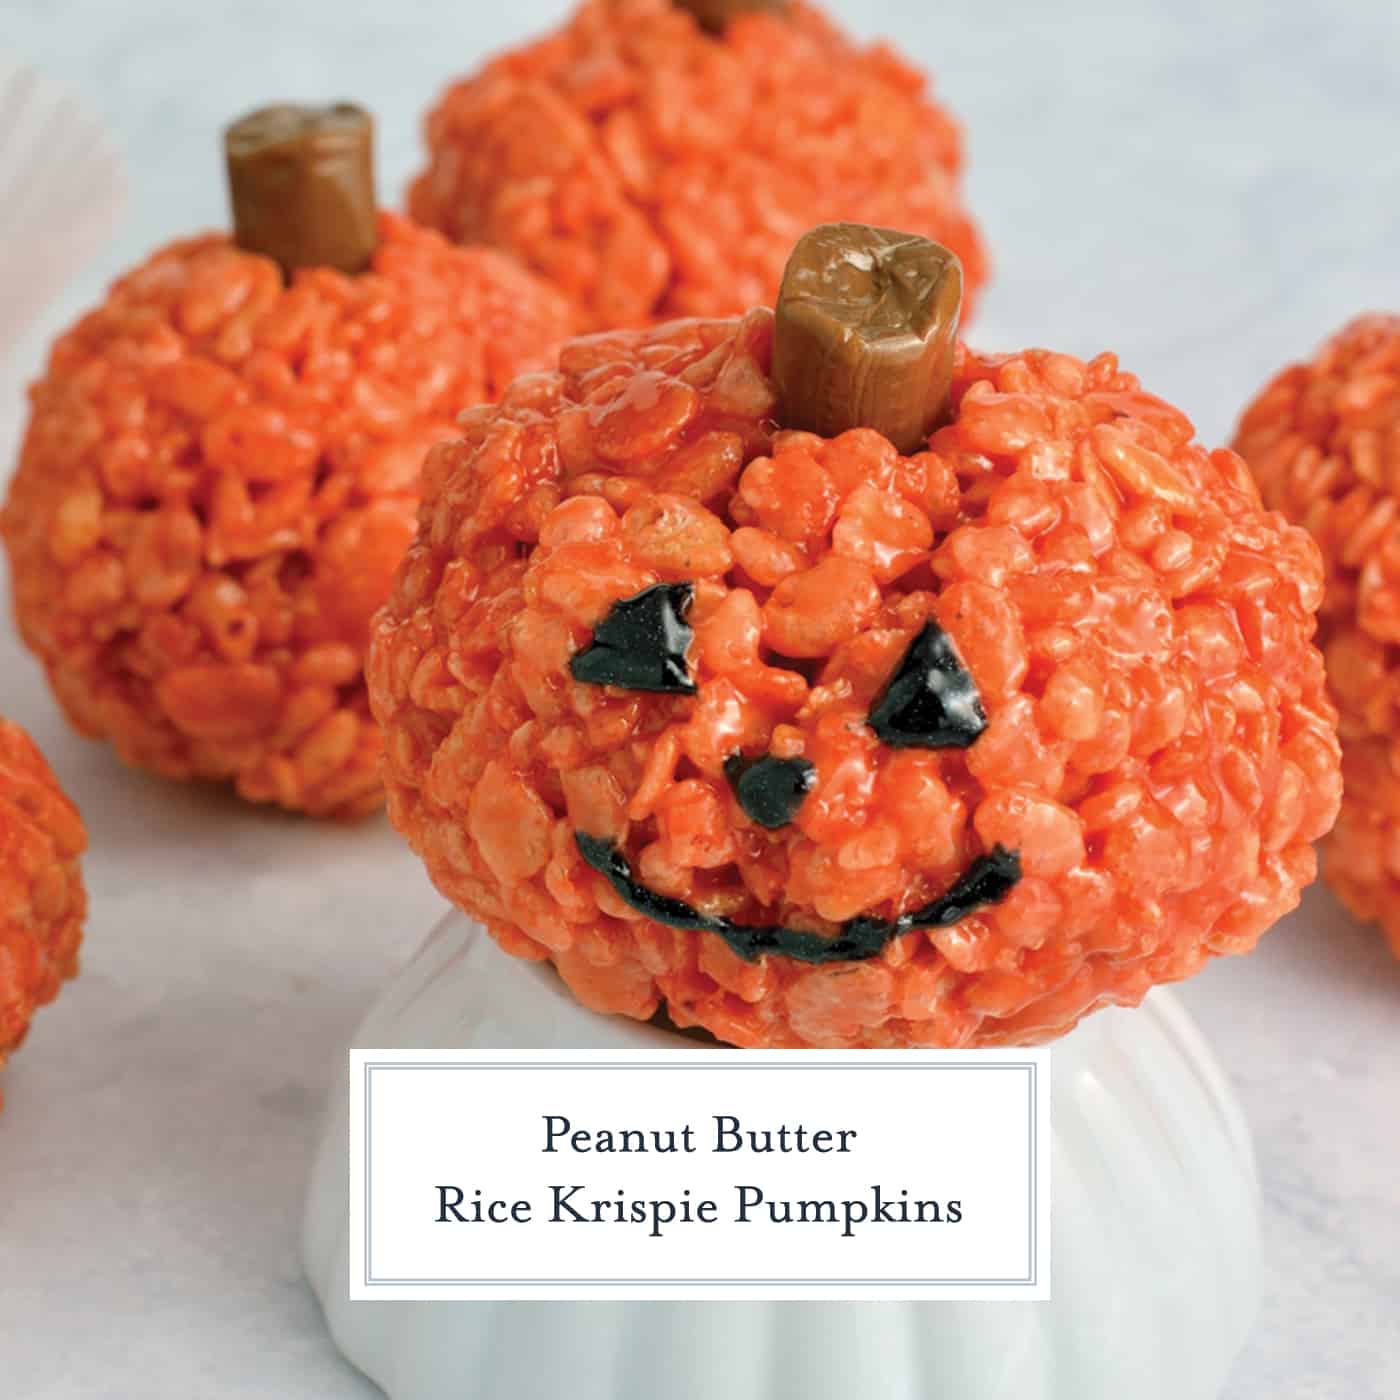 Pumpkin Rice Krispie Treats are perfect for any fall gathering or as an easy Halloween dessert! Ready in only 20 minutes, everyone will love them! #halloweenricekrispietreats #pumpkinricekrispietreats www.savoryexperiments.com